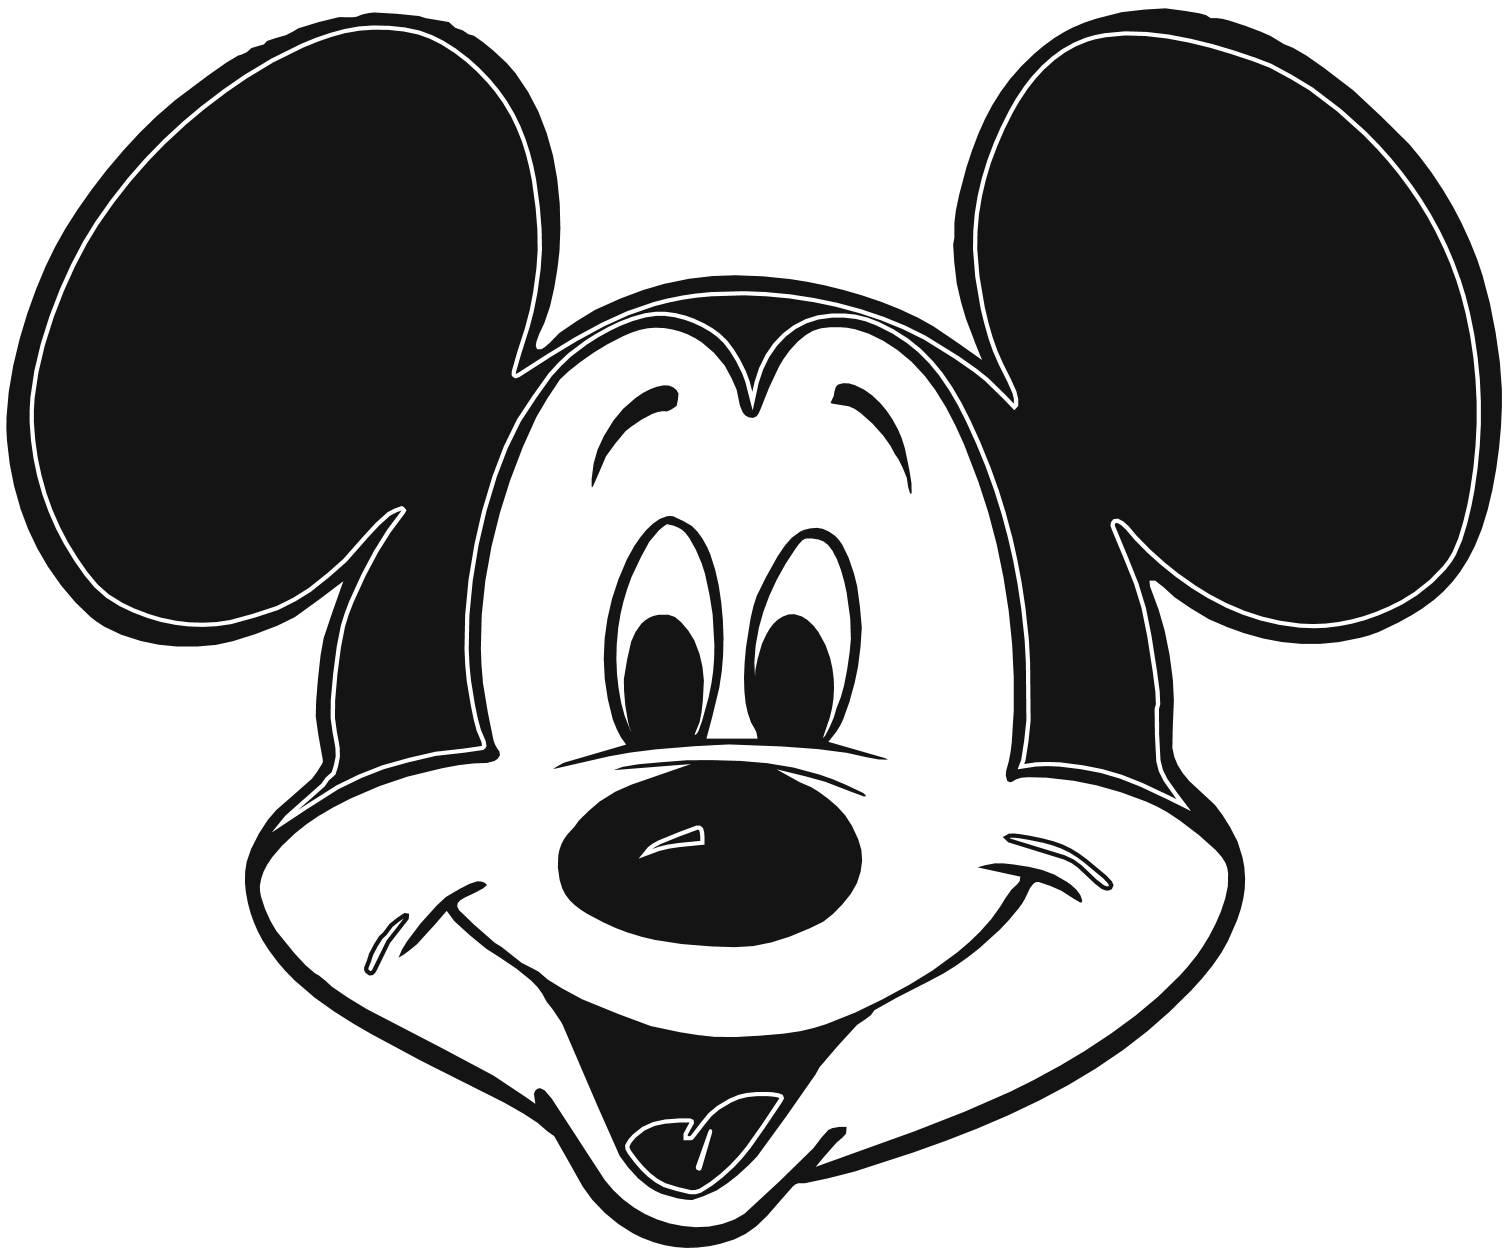 Mickey Mouse Cartoon 1260 Hd Wallpapers in Cartoons 